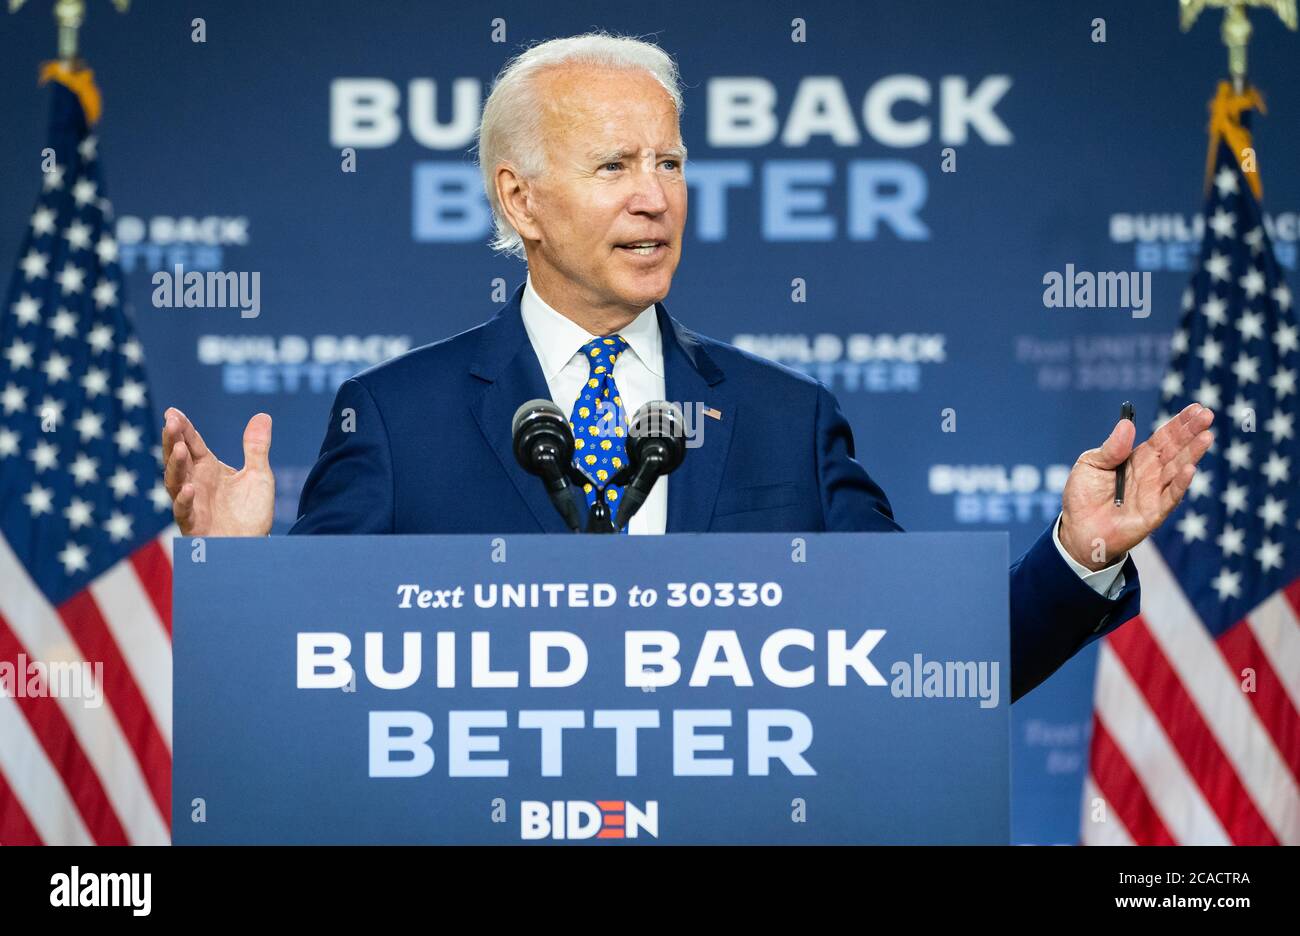 WILMINGTON, DELAWARE, USA - 28 July 2020 - US presidential candidate Joe Biden speaks at the Build Back Better Press Conference on Economic Equity in Stock Photo